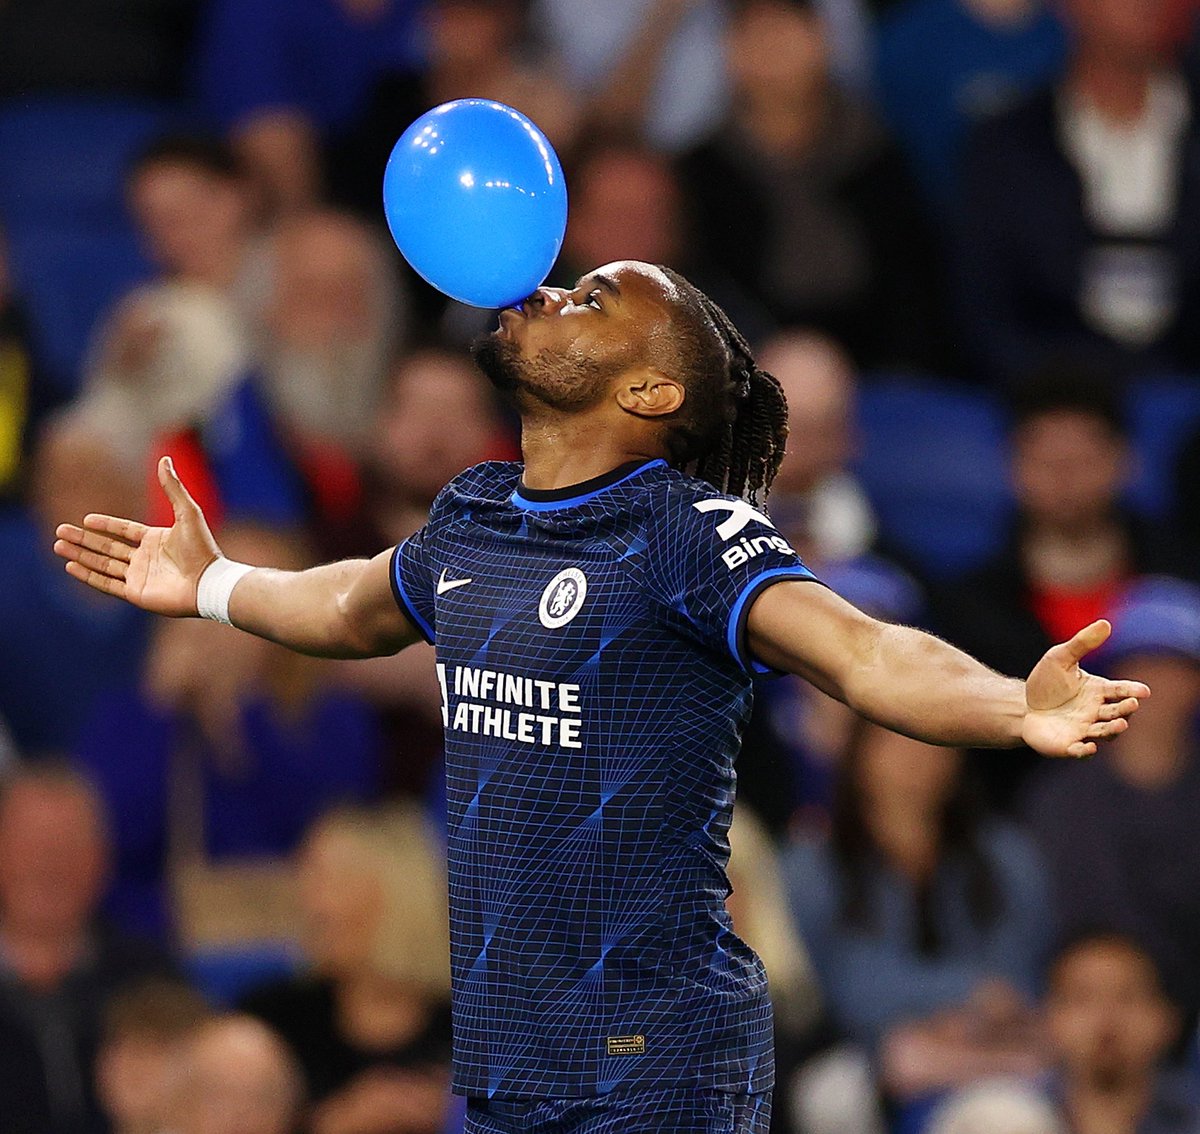 Christopher Nkunku with his first blue balloon celebration! 🤩🎈